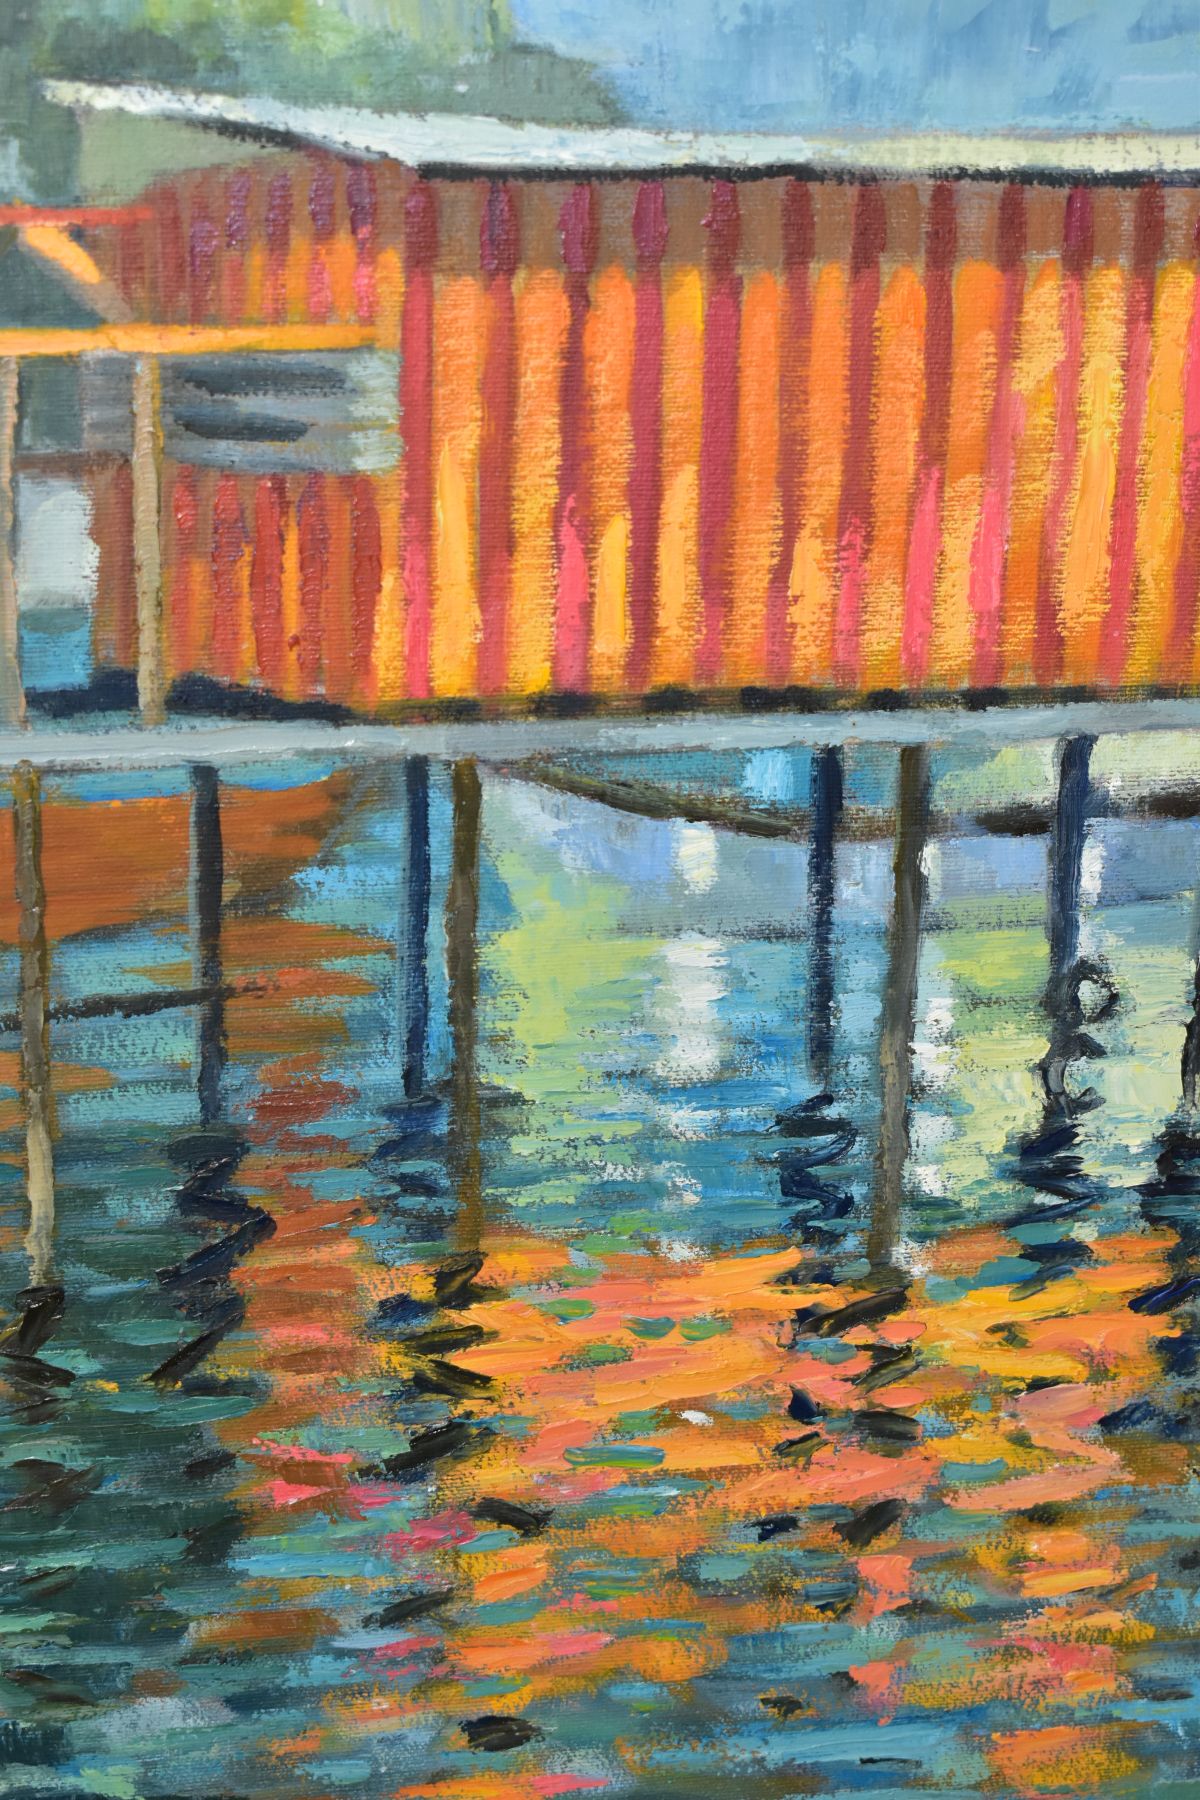 G CADBURY (20TH CENTURY), A COLOURFUL BUILDING ON A PIER OVER WATER, signed bottom right, oil on - Image 2 of 3